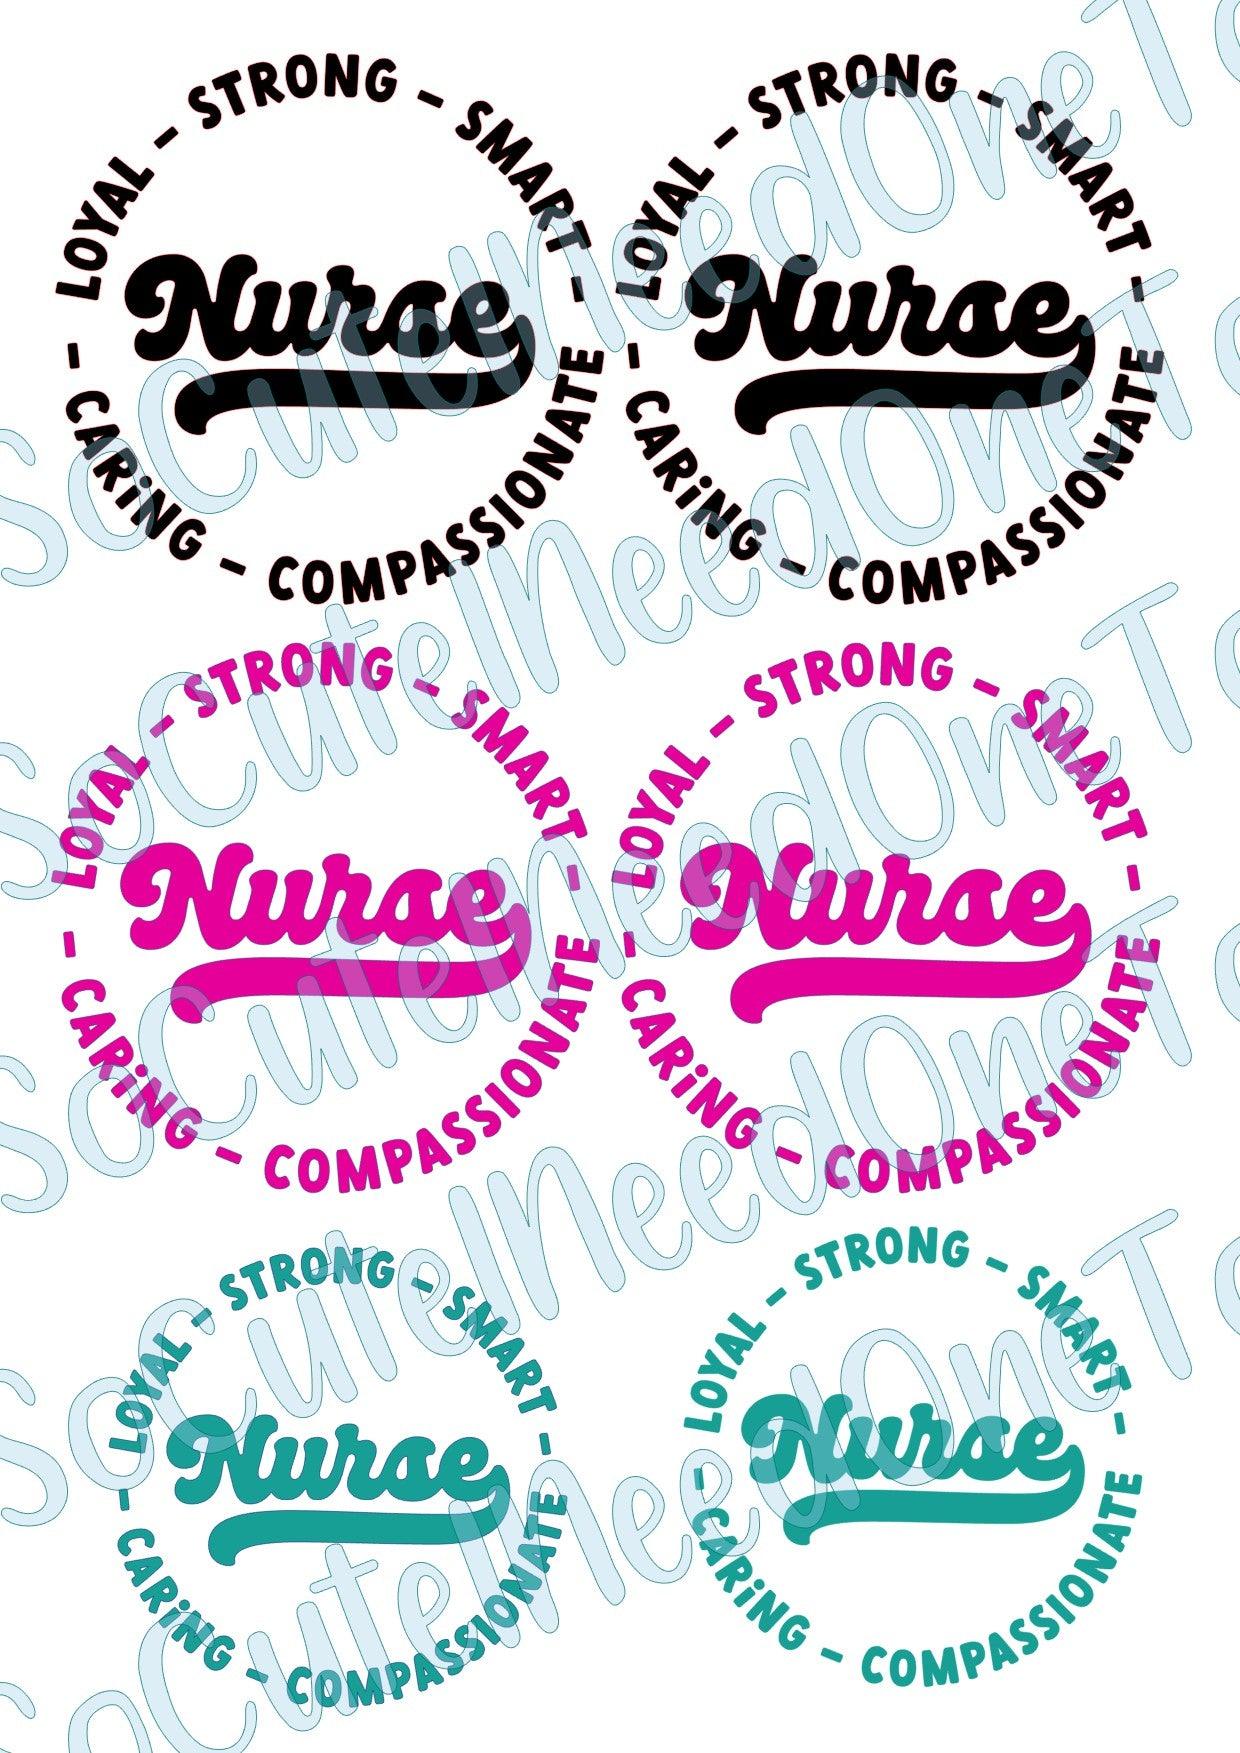 Nurse Circle on Clear/White Waterslide Paper Ready To Use - SoCuteINeedOneToo